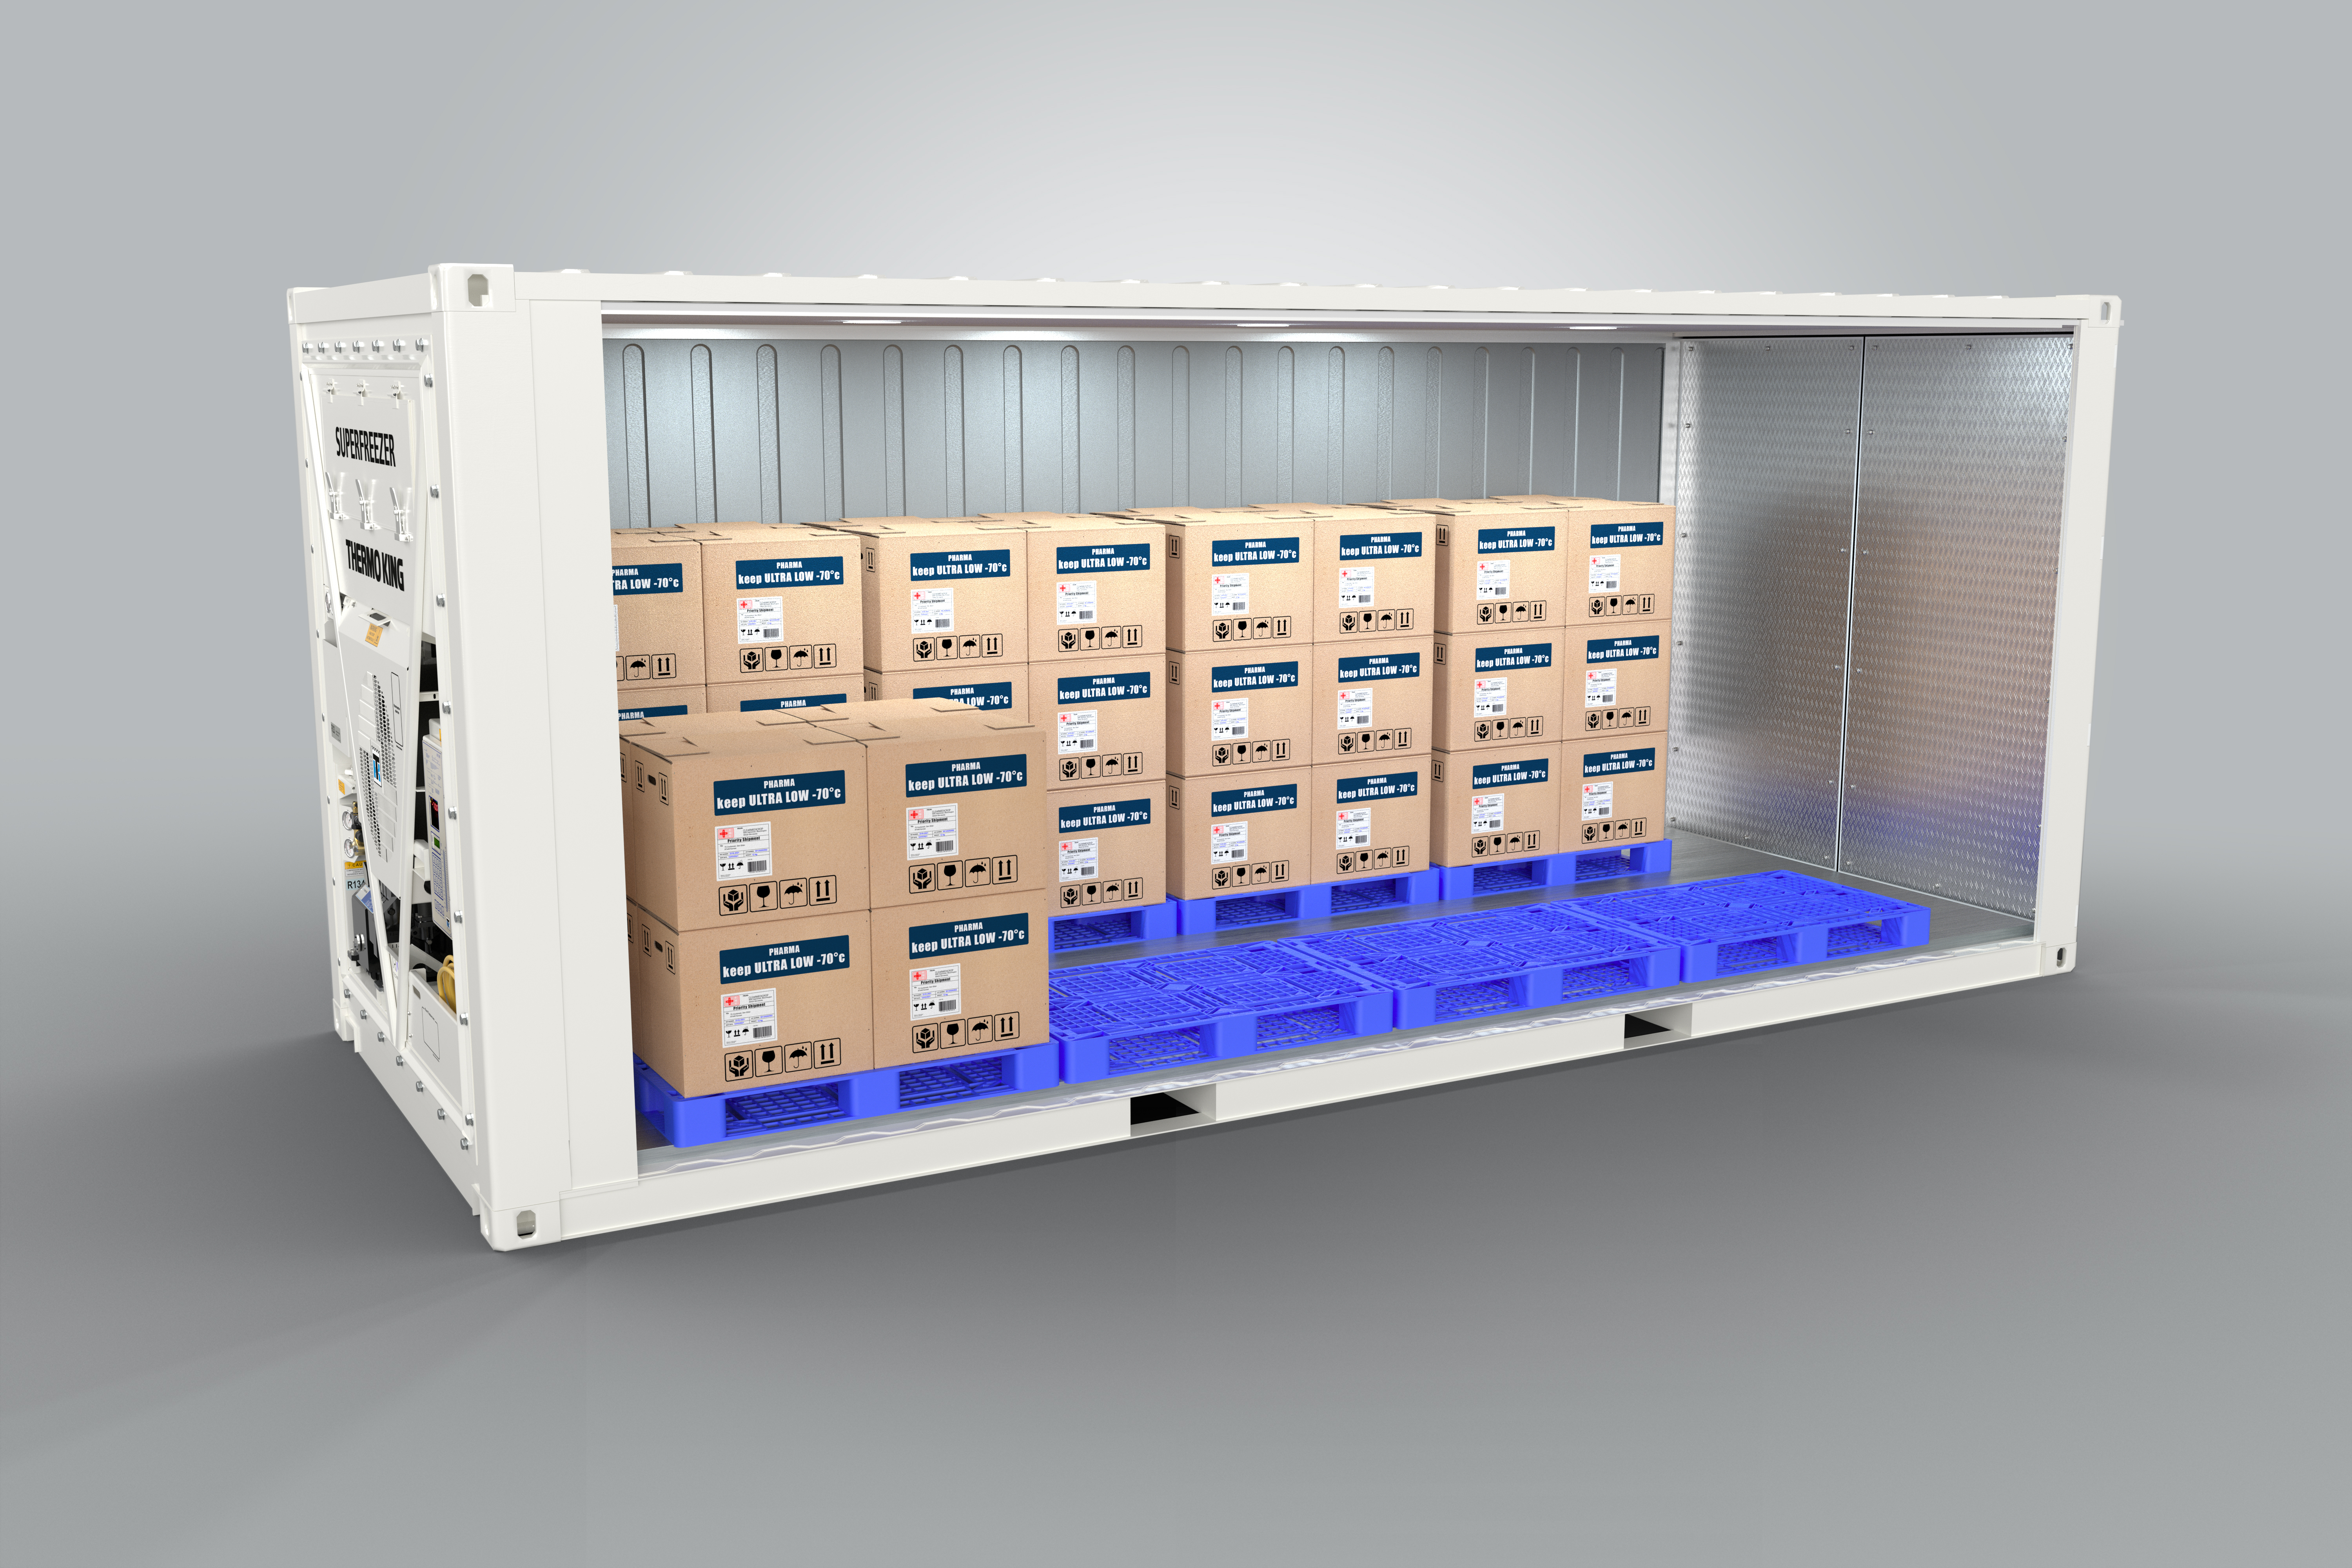 Explore Thermo King portable cold storage solutions